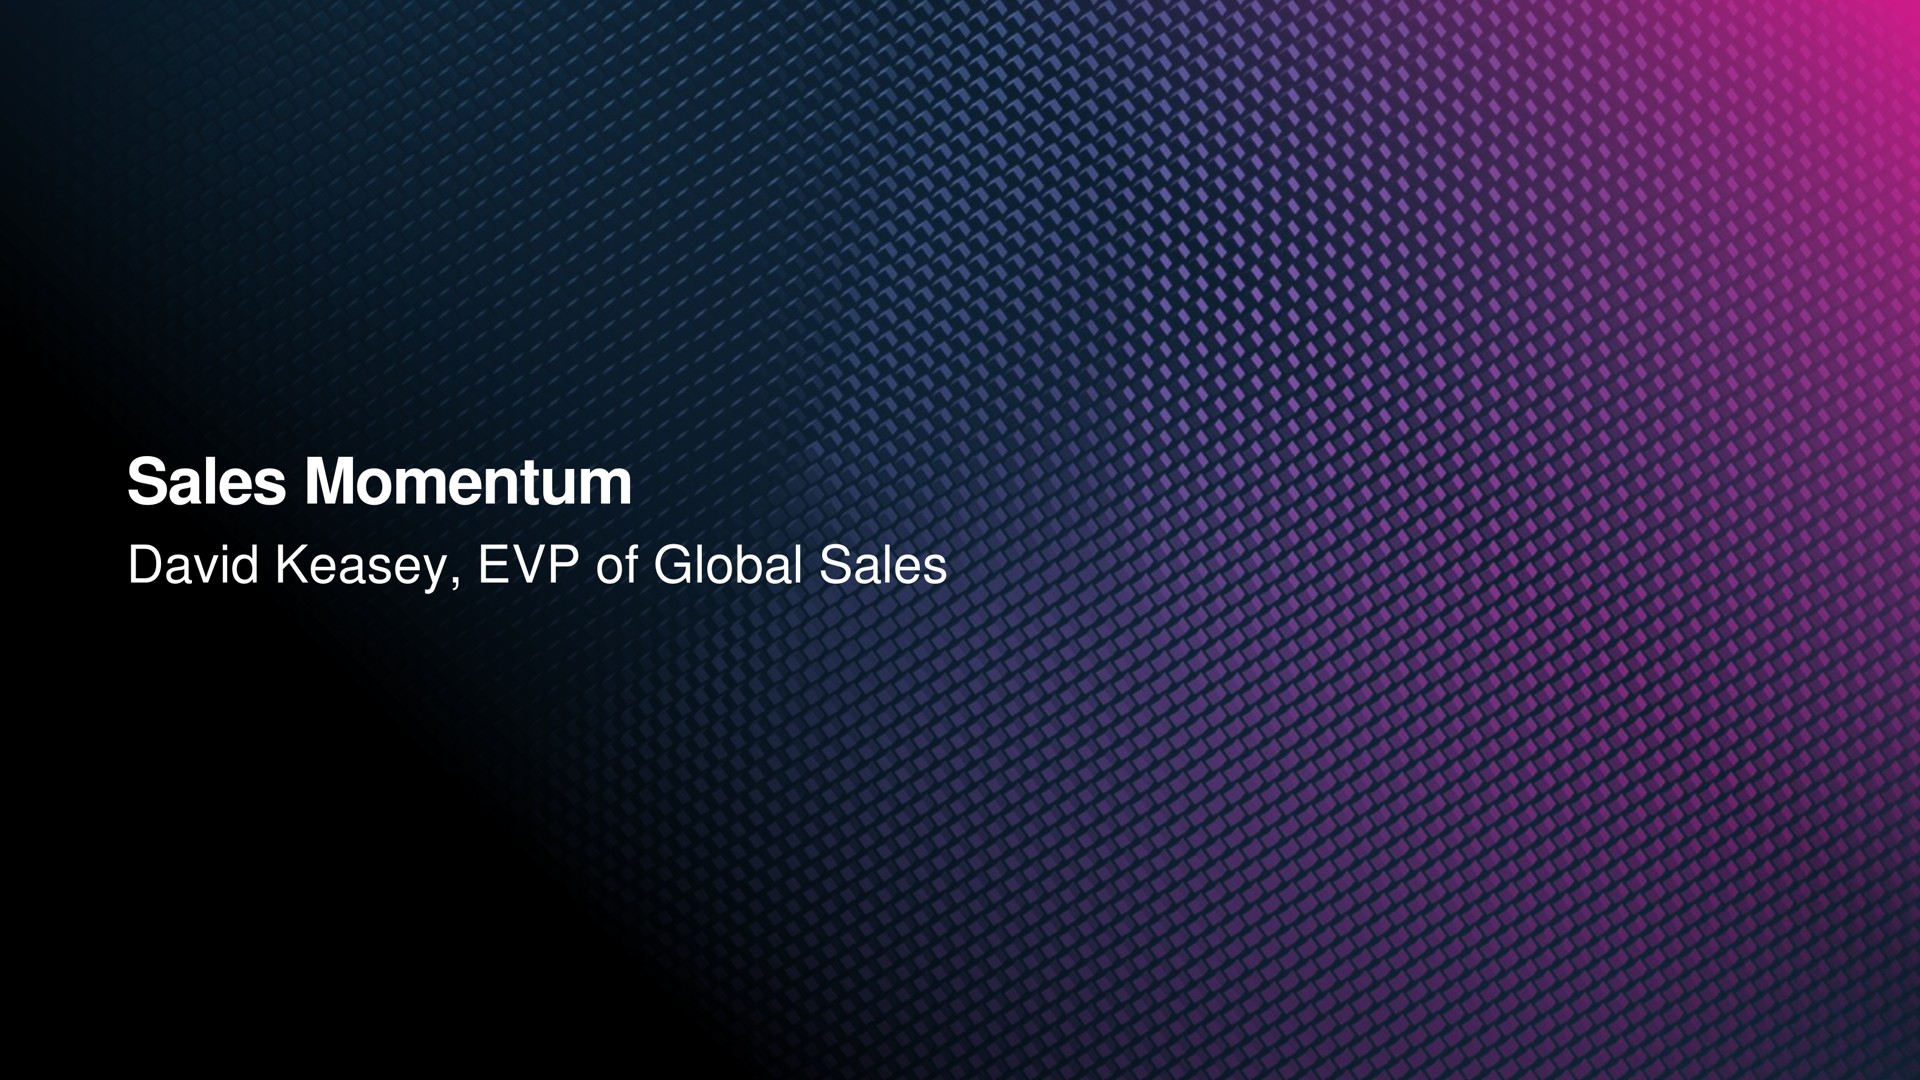 sales momentum of global sales is tare sos yoy sess a sos sos eyes sey sooty geo | Cyxtera